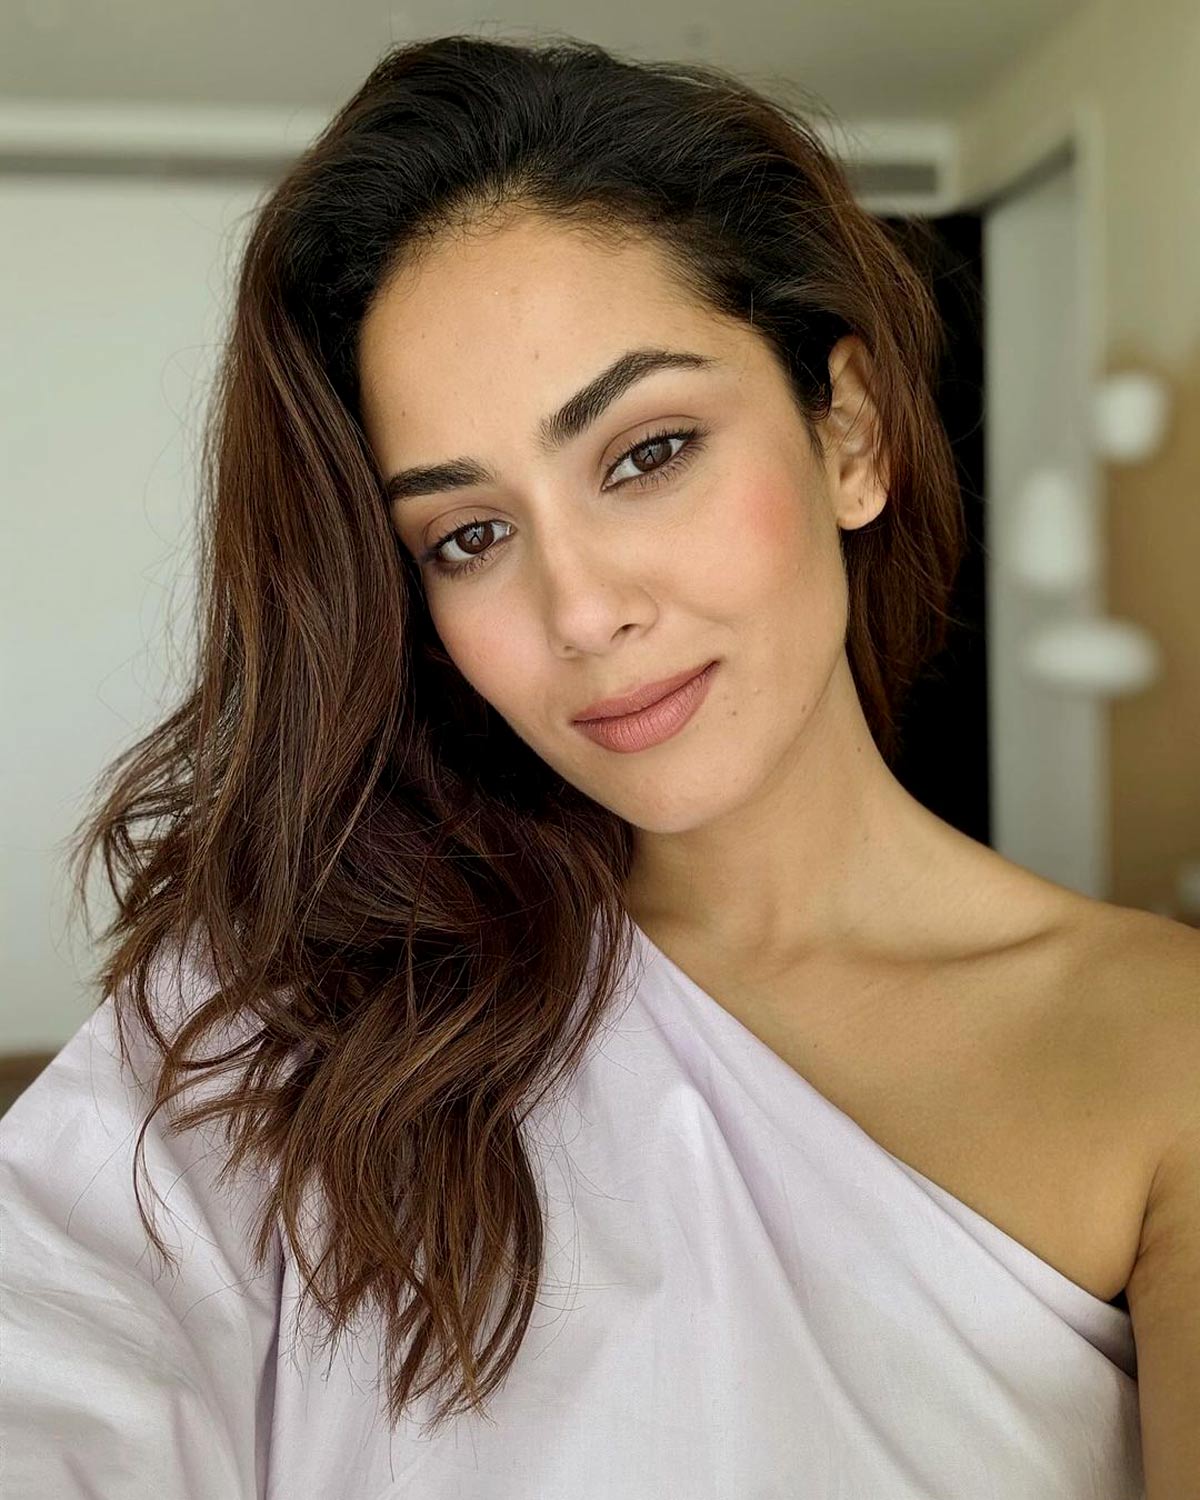 Is Mira Kapoor The Hottest Star Wife?